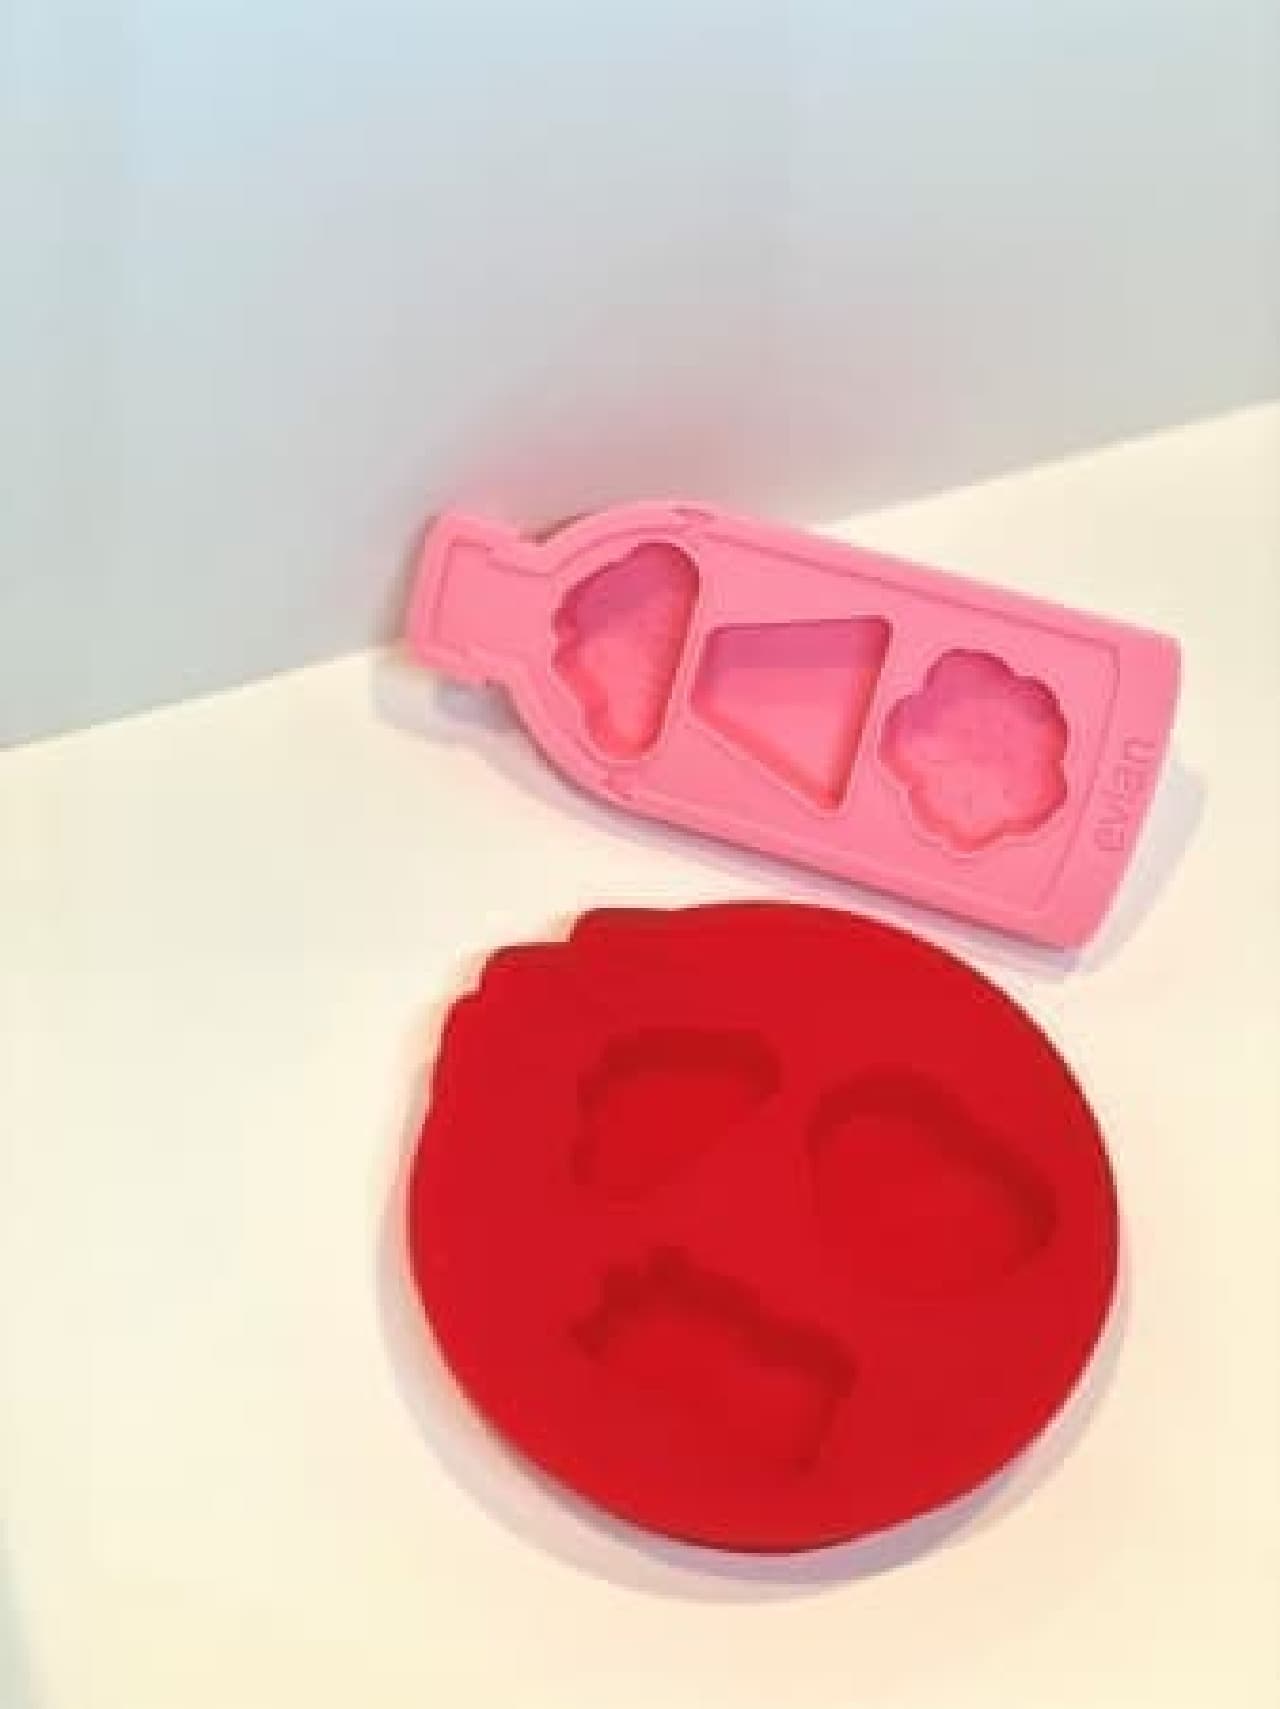 Evian's limited design bottle --A campaign to get a cute ice tray